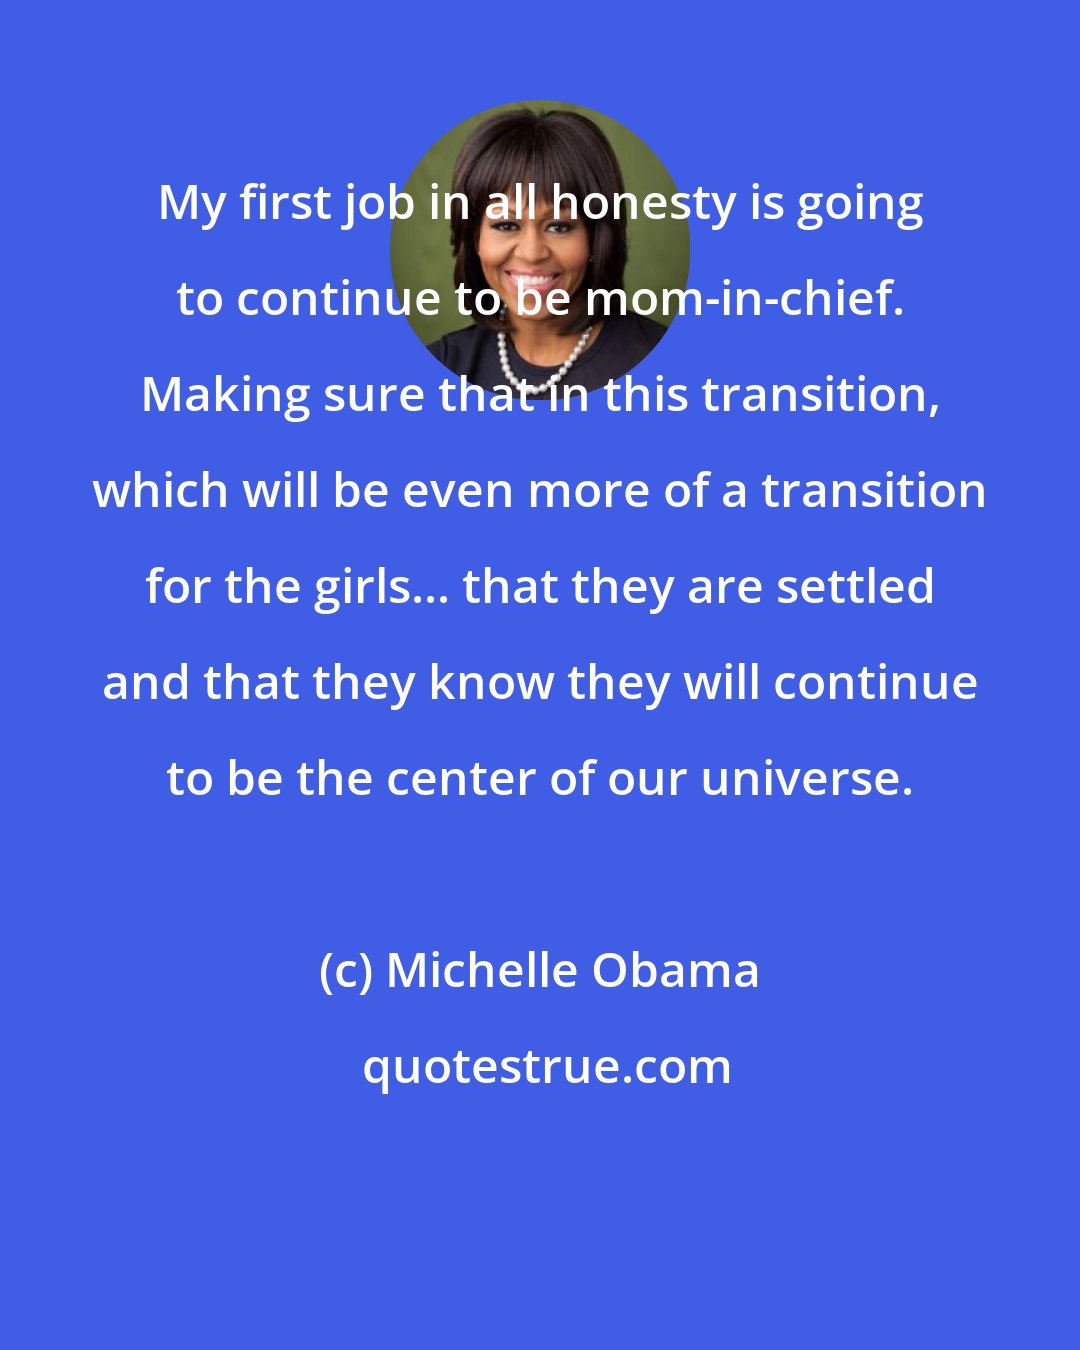 Michelle Obama: My first job in all honesty is going to continue to be mom-in-chief. Making sure that in this transition, which will be even more of a transition for the girls... that they are settled and that they know they will continue to be the center of our universe.